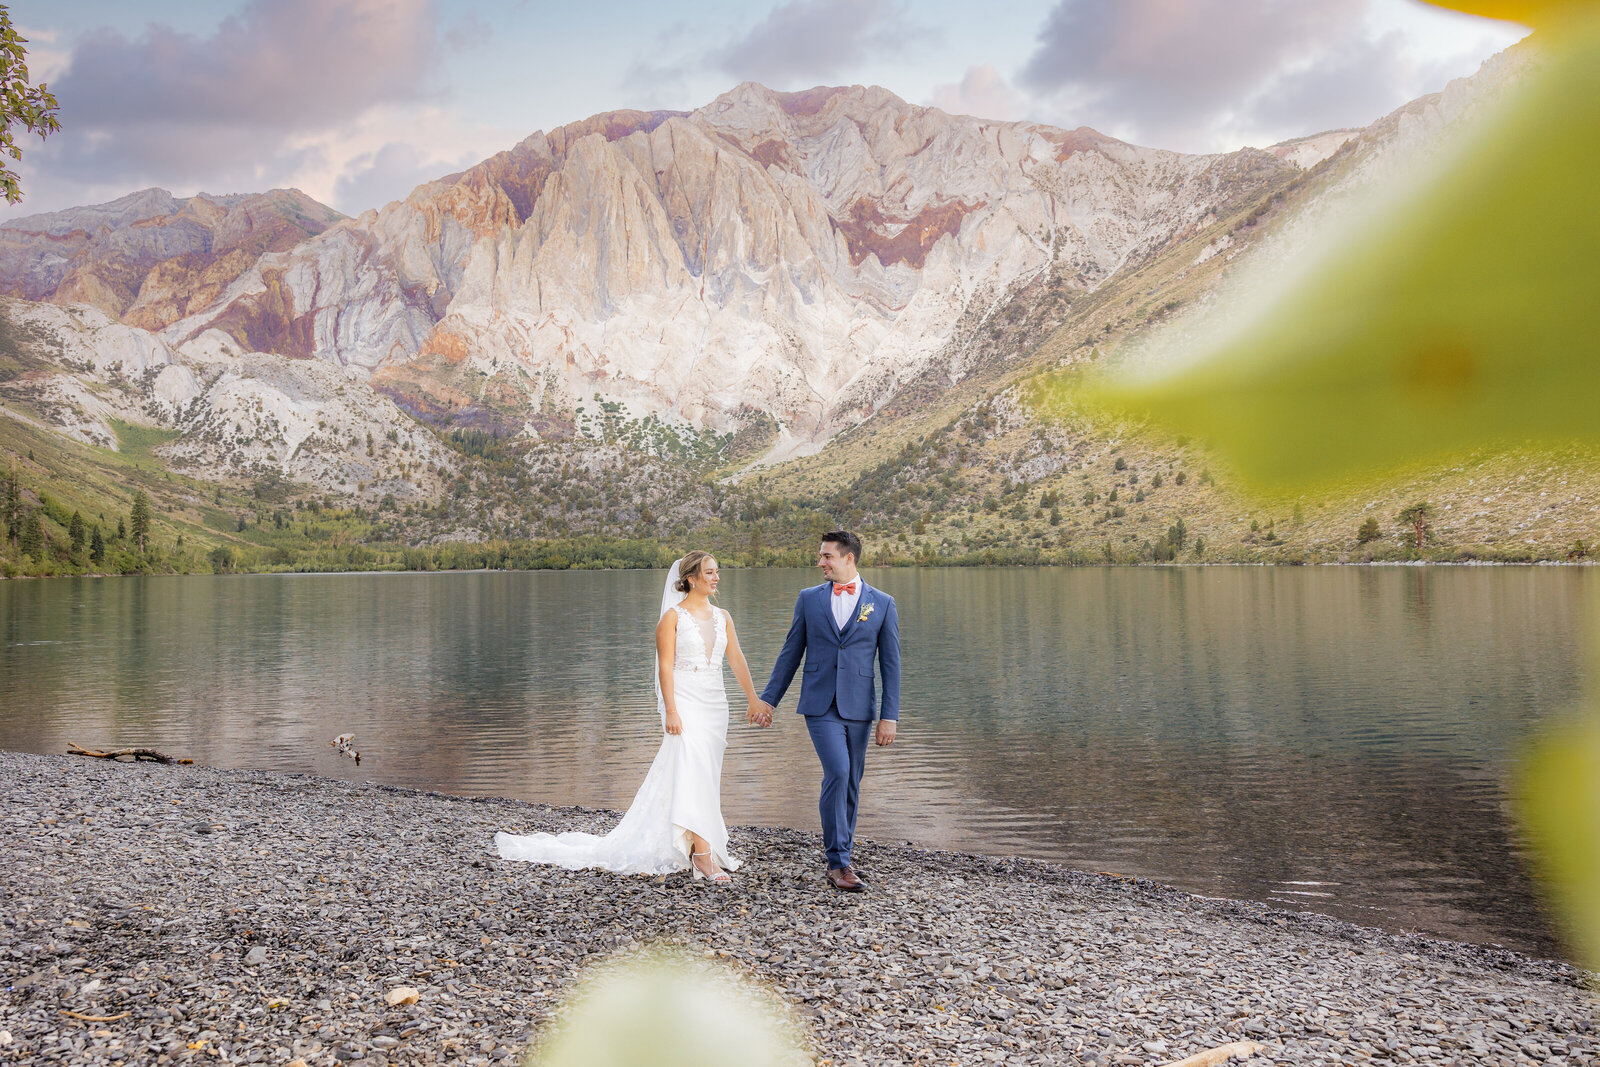 Bride and groom hold hands and walk in front of Mammoth Lake while smiling. Photo by Wedding photography studio Sacramento, CA, Philippe Studio Pro.